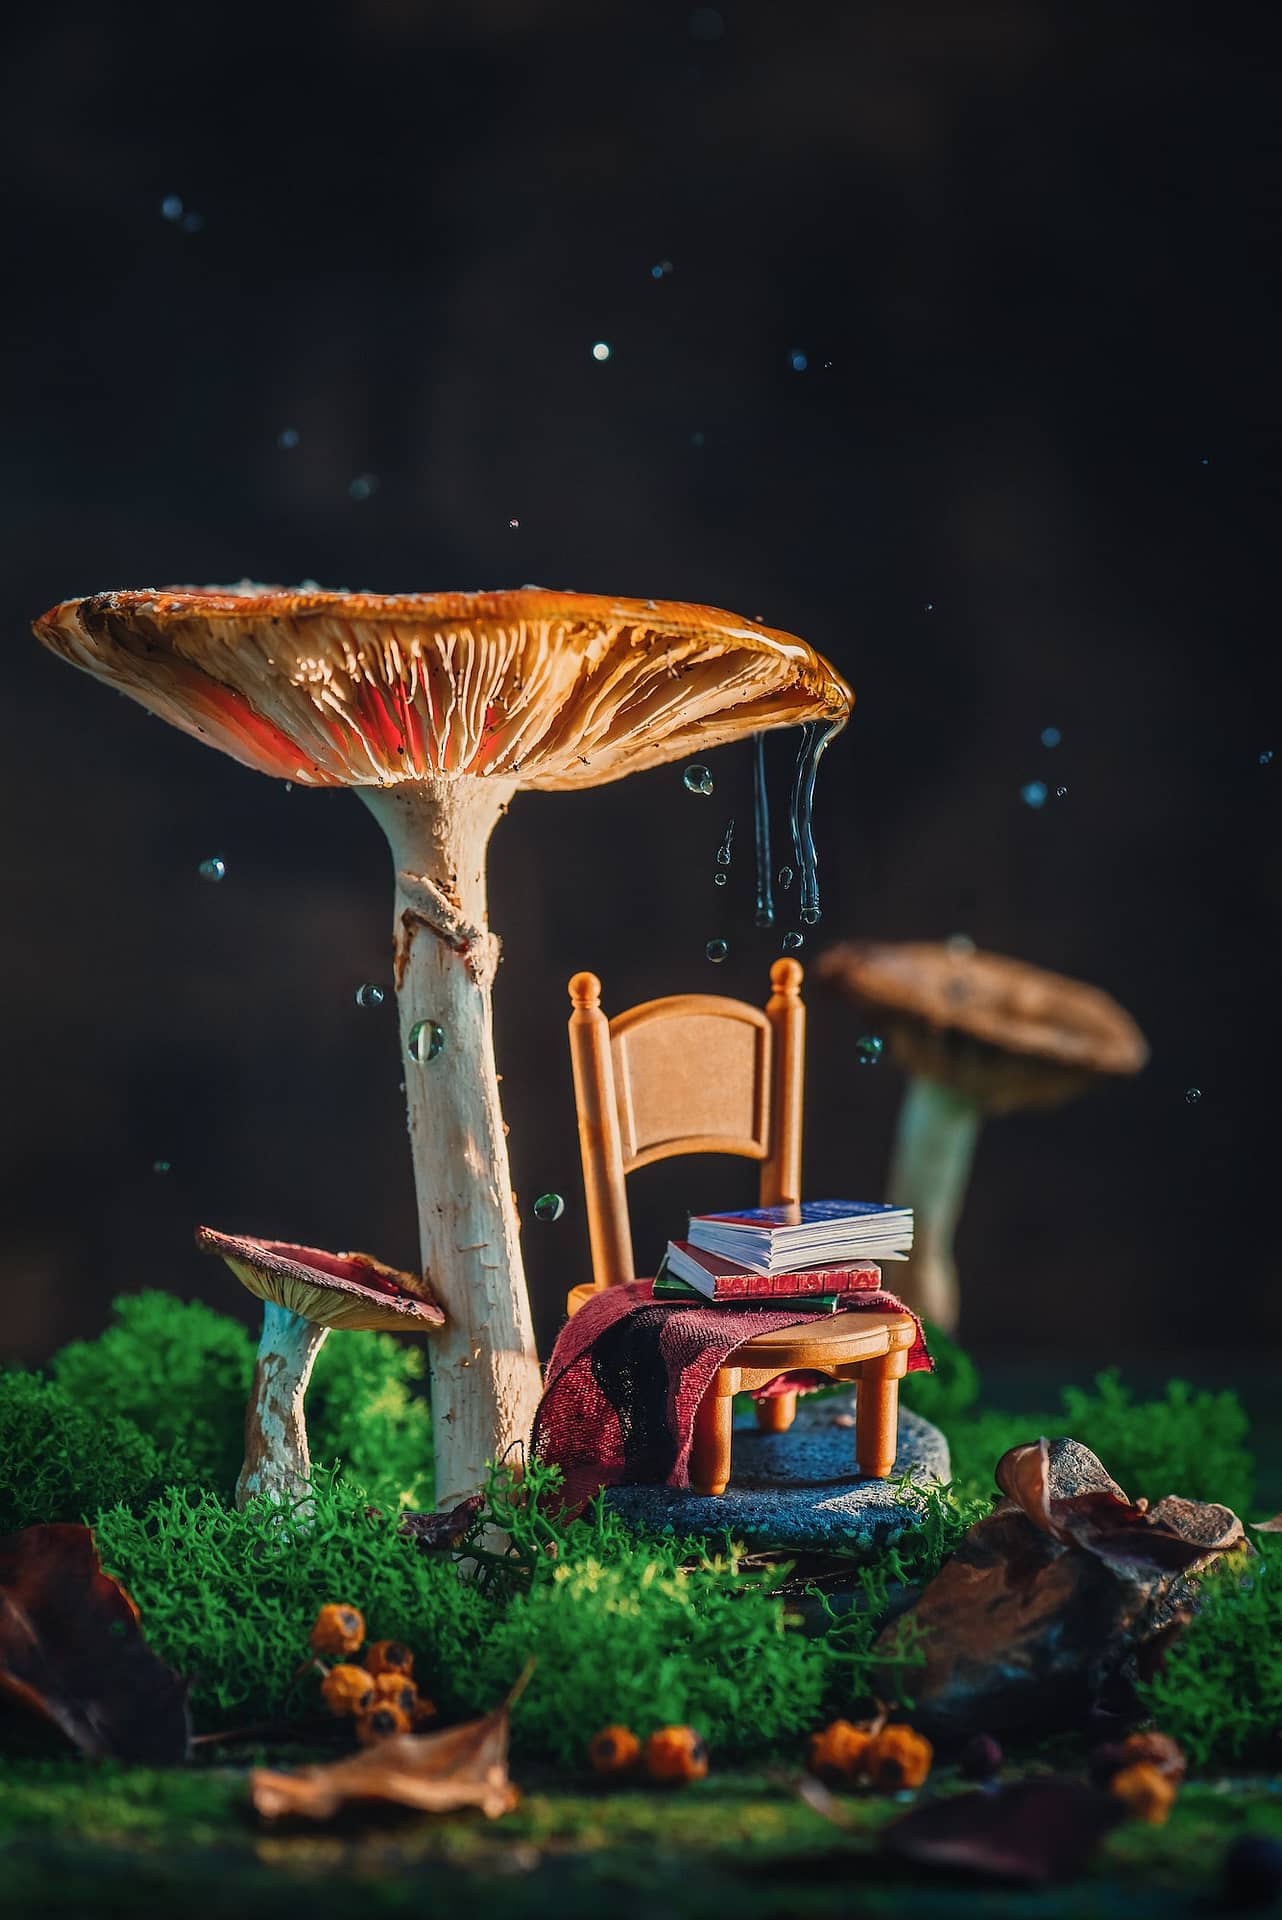 Tiny chair with plaid and a stack of books under a gigantic mushroom with moss and raindrops